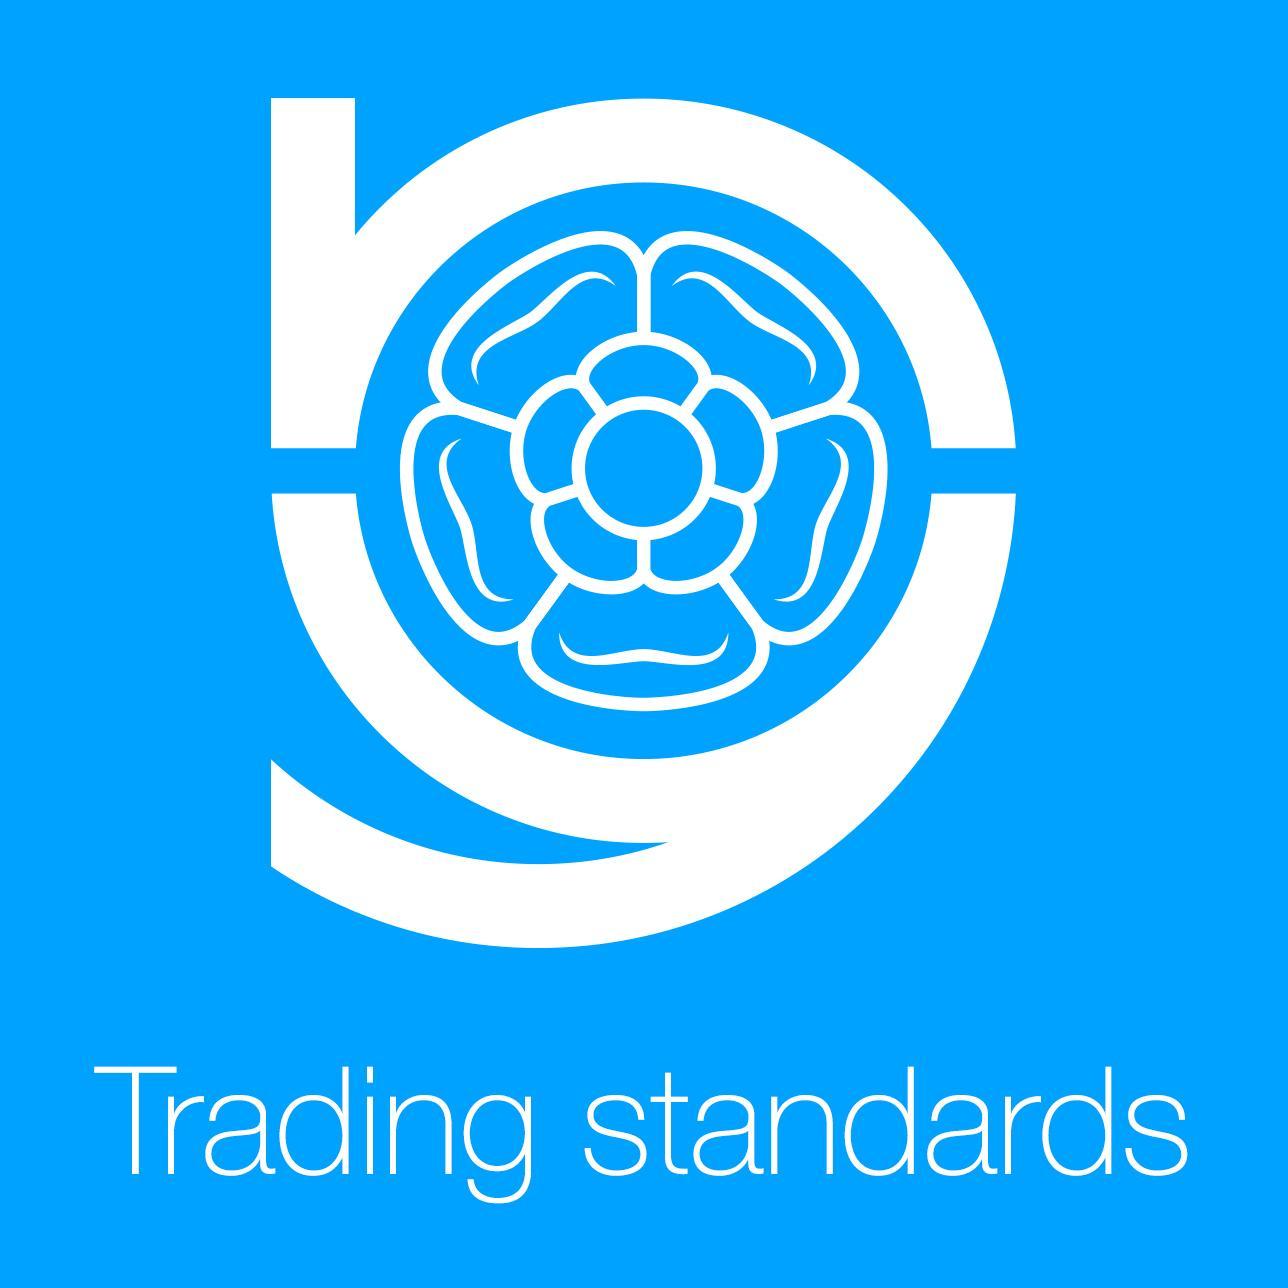 Information from @northyorkscc trading standards team. Advice cannot be provided on Twitter, please call @CitizensAdvice Consumer Service 0808 223 1133.